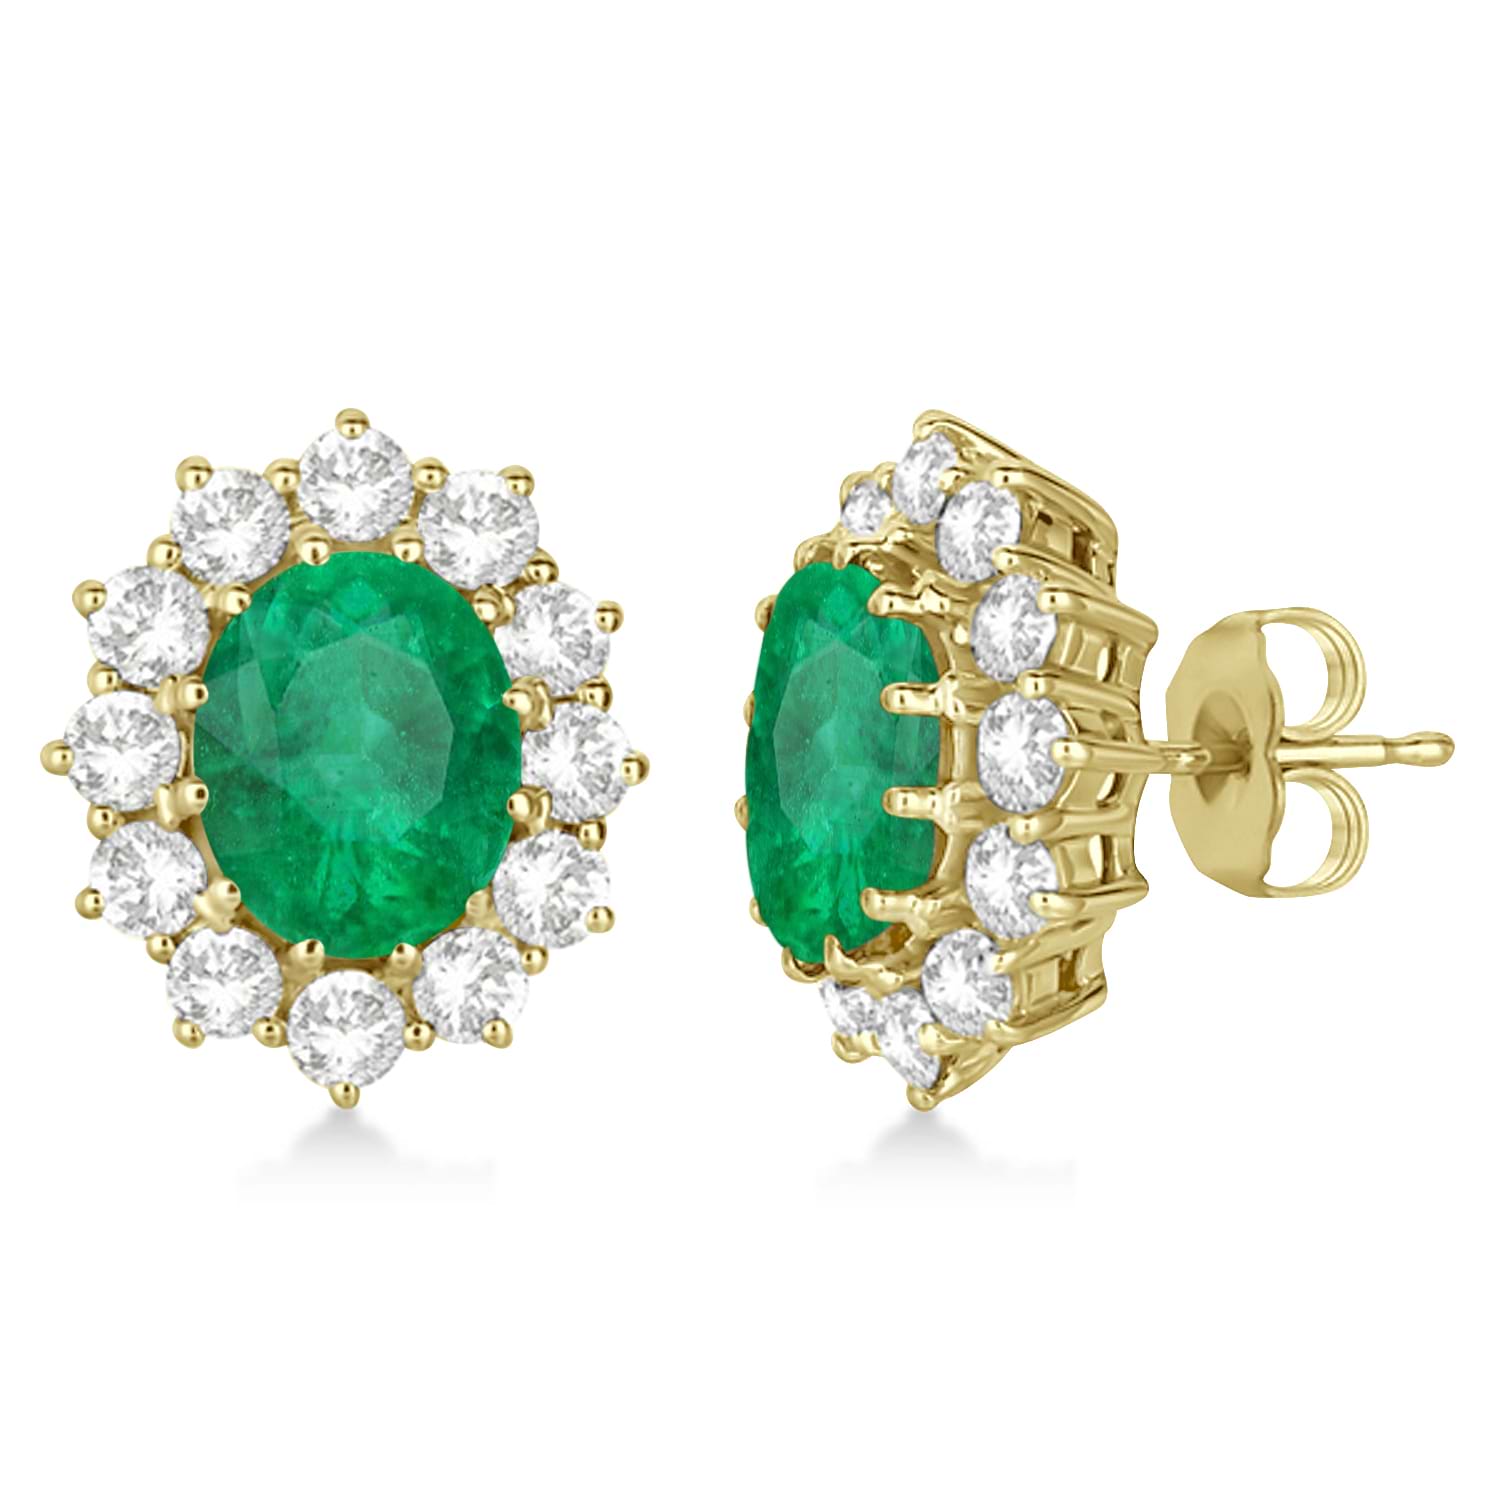 Oval Lab Emerald and Diamond Earrings 14k Yellow Gold (7.10ctw)